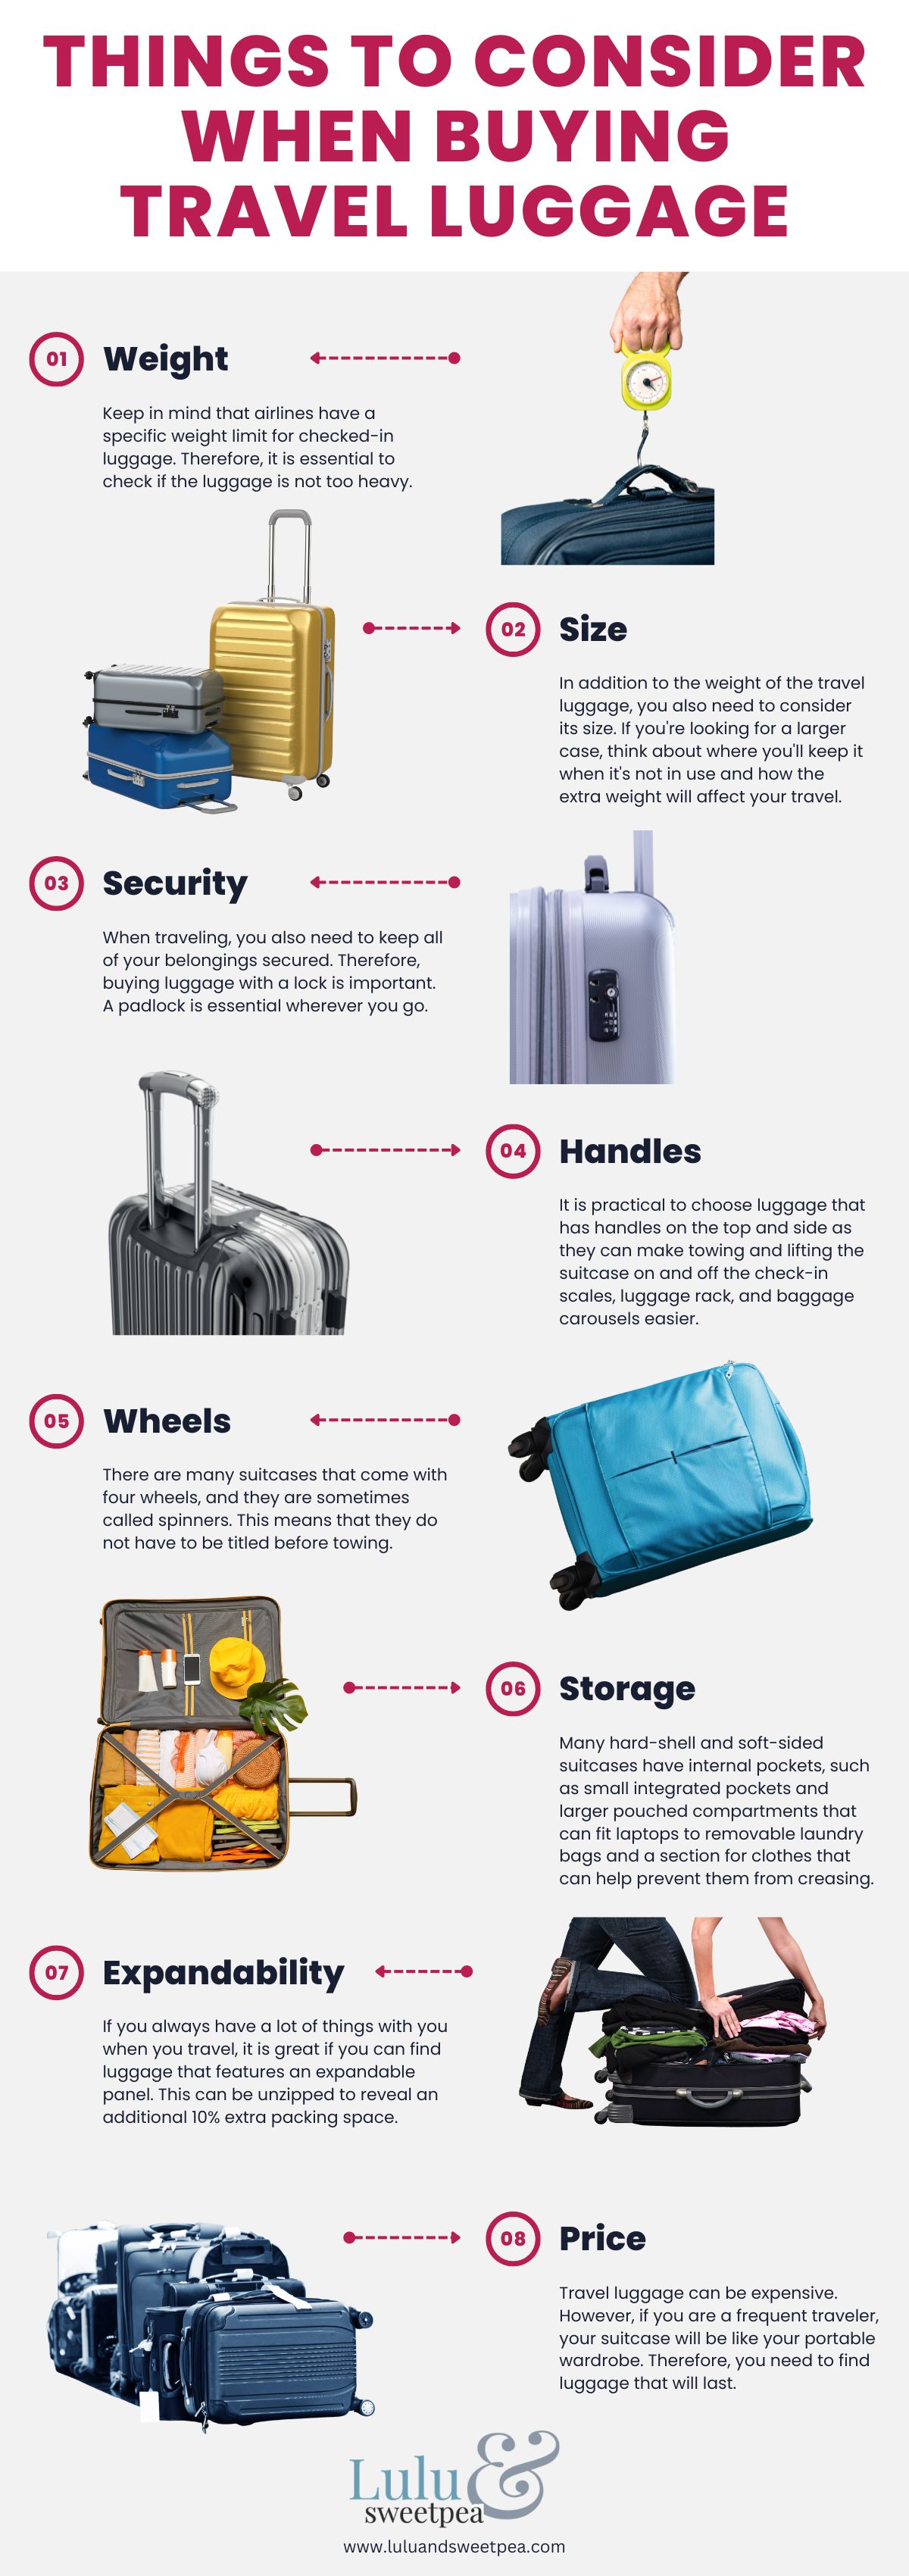 Things to Consider When Buying travel luggage